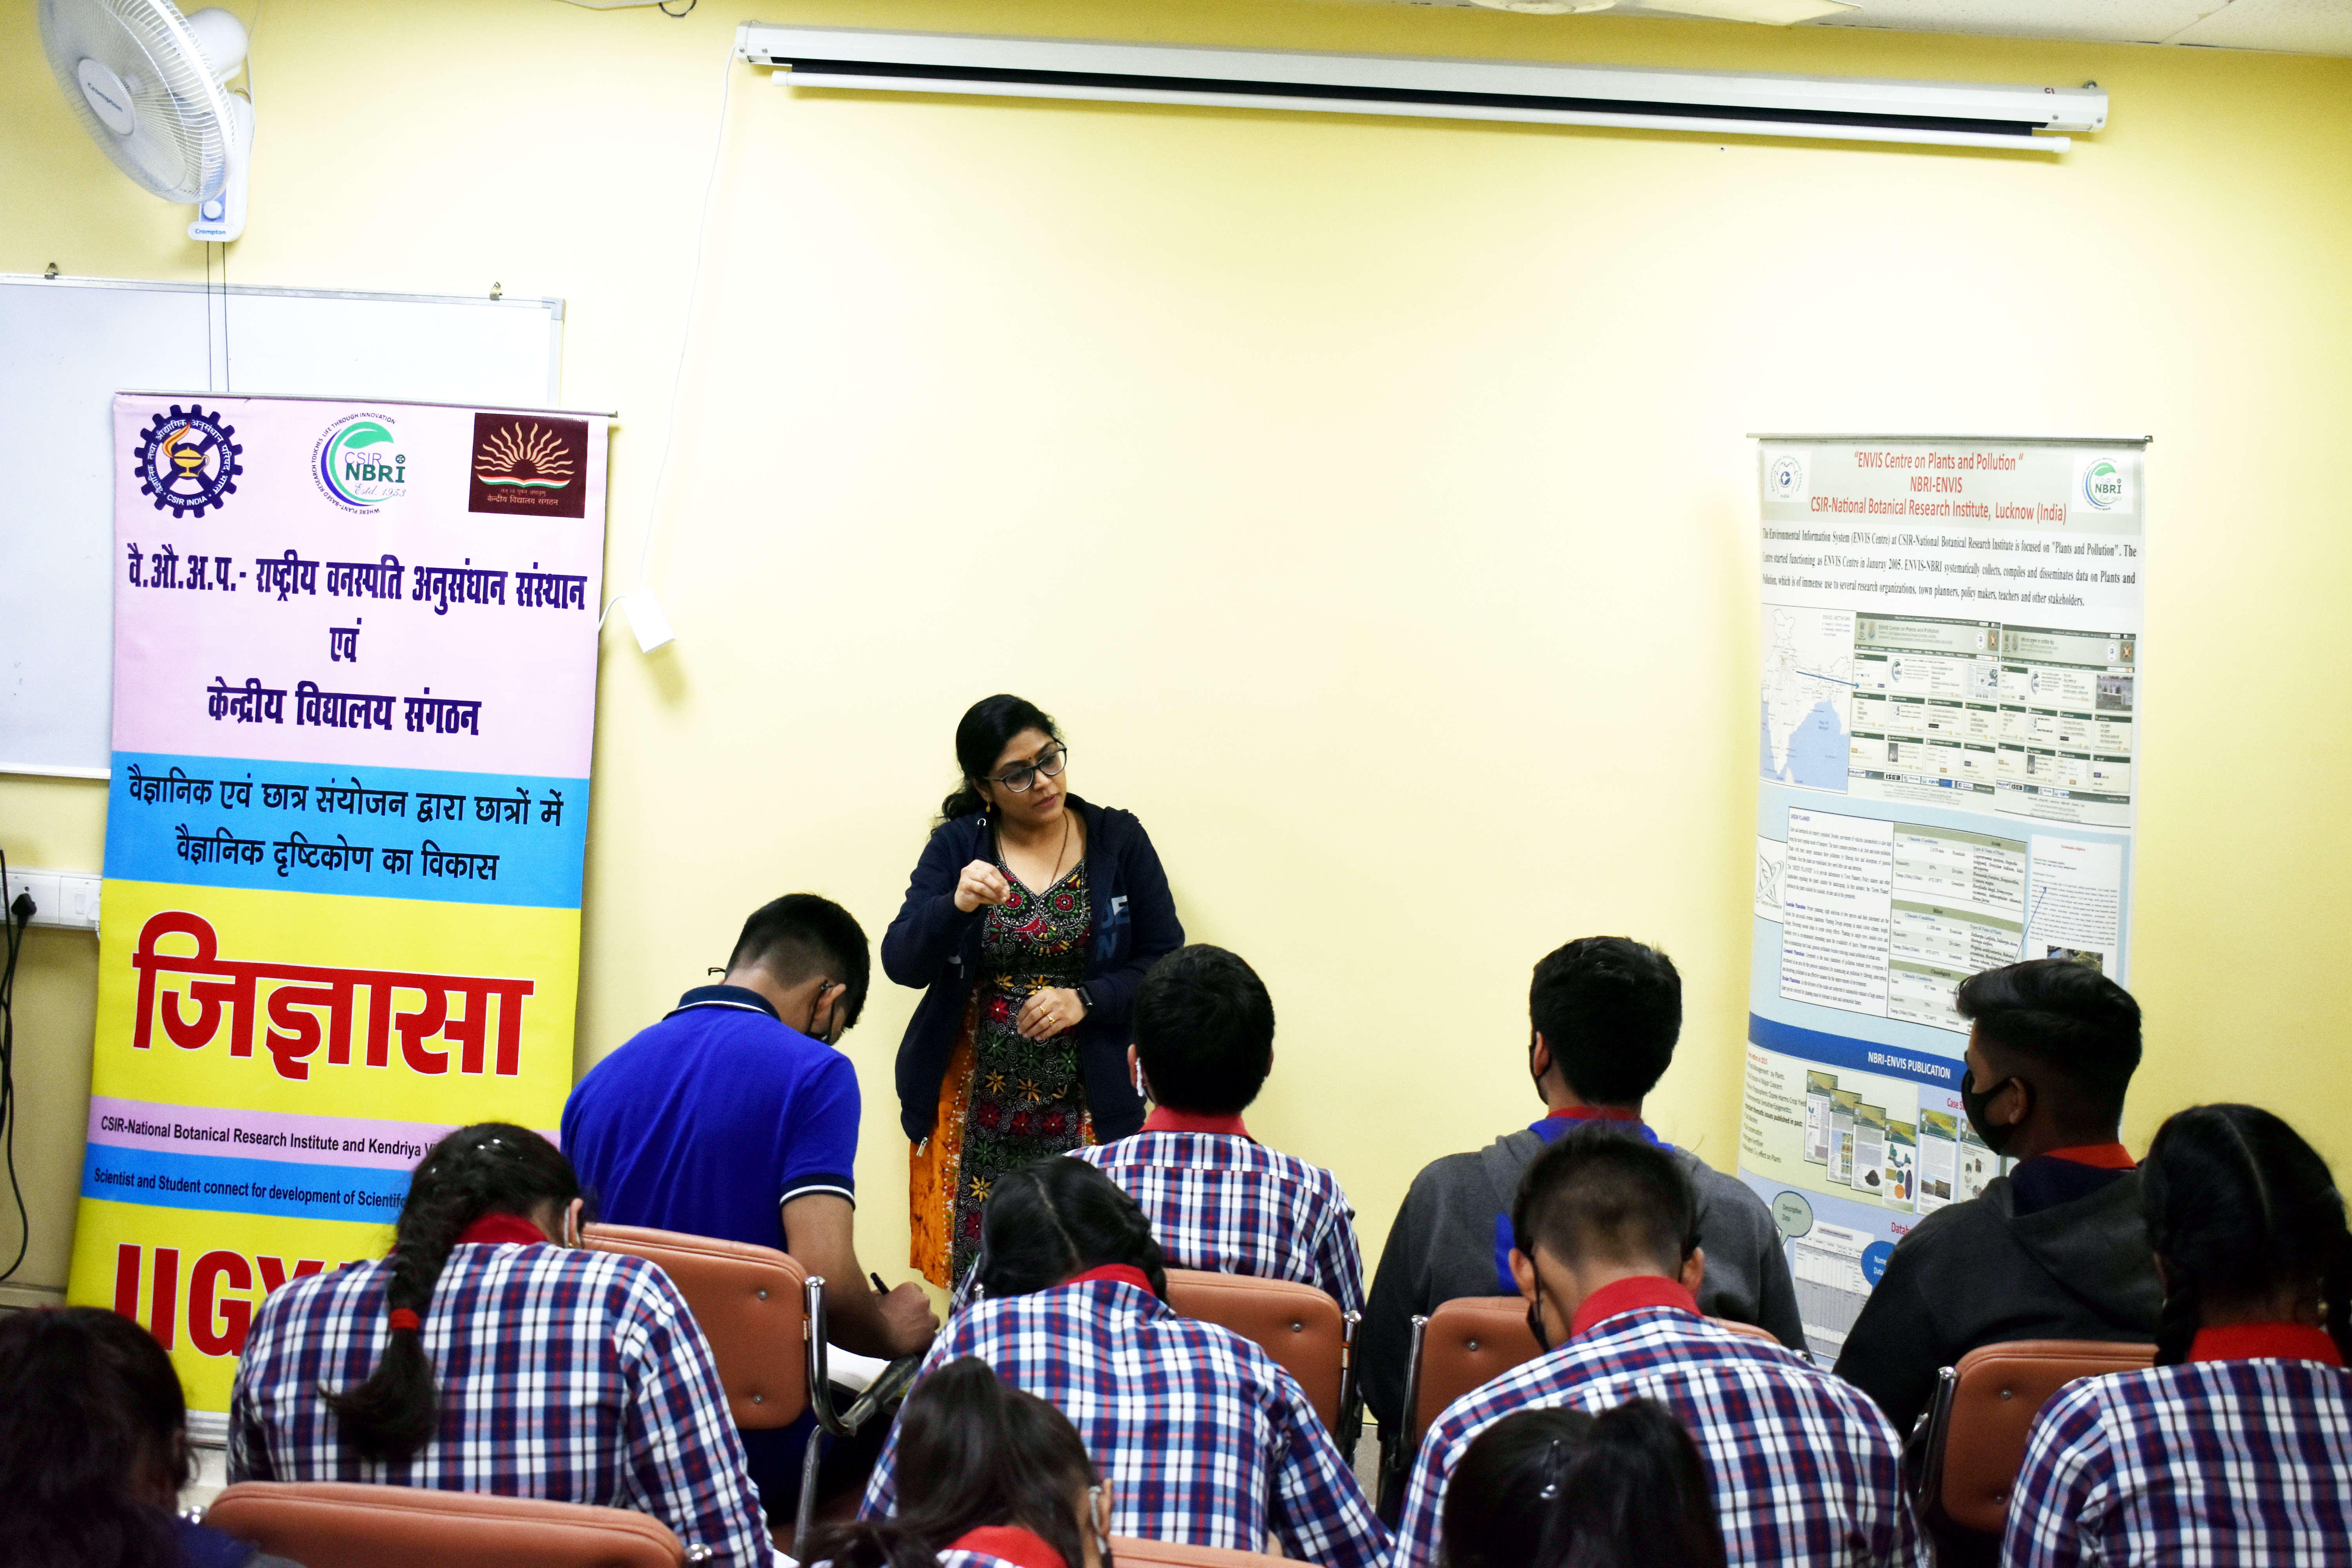 Interaction with students about ENVIS RP-NBRI-2022